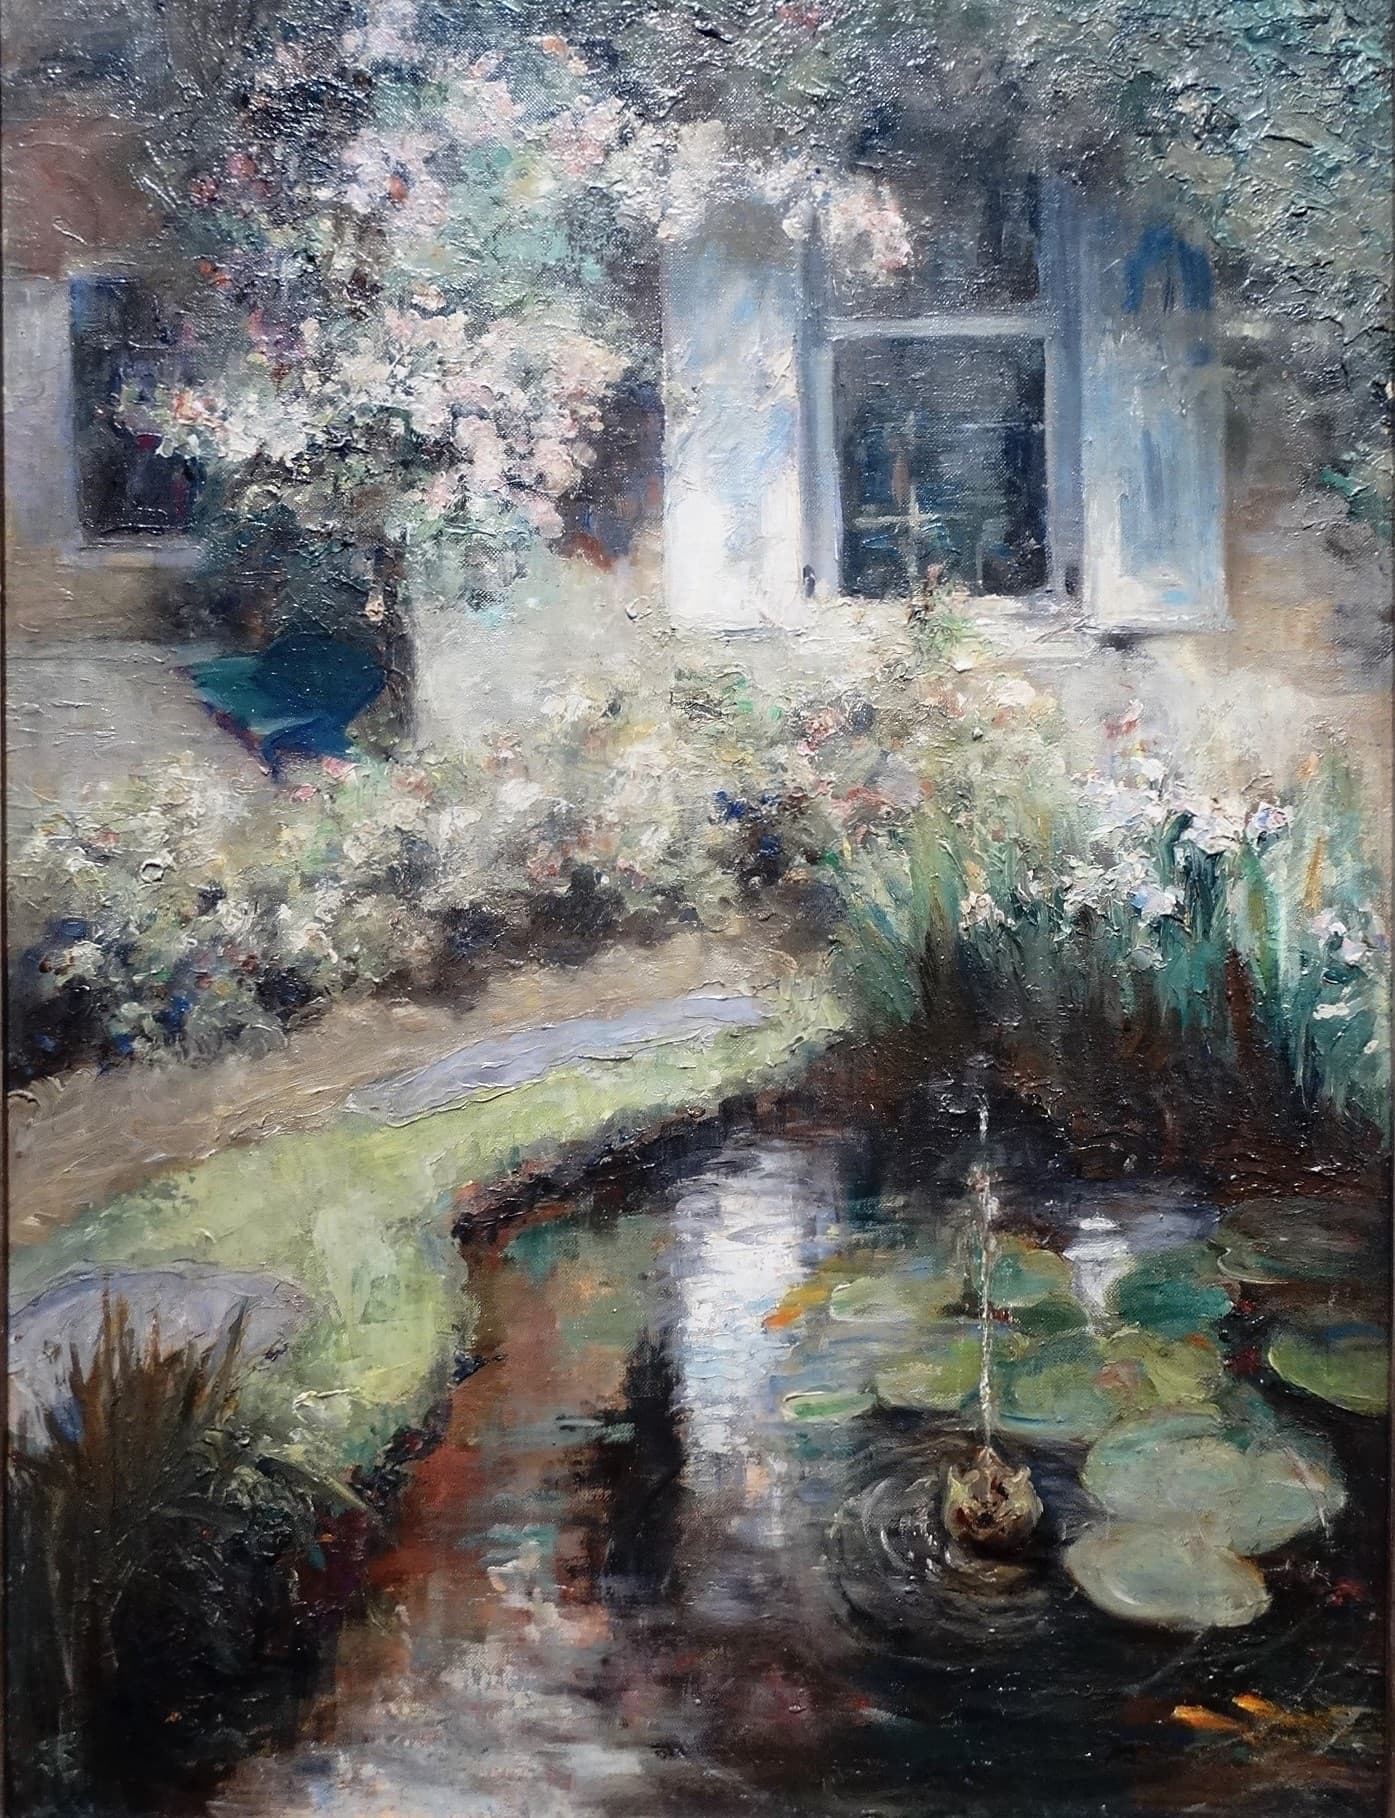 "The Lily Pond"